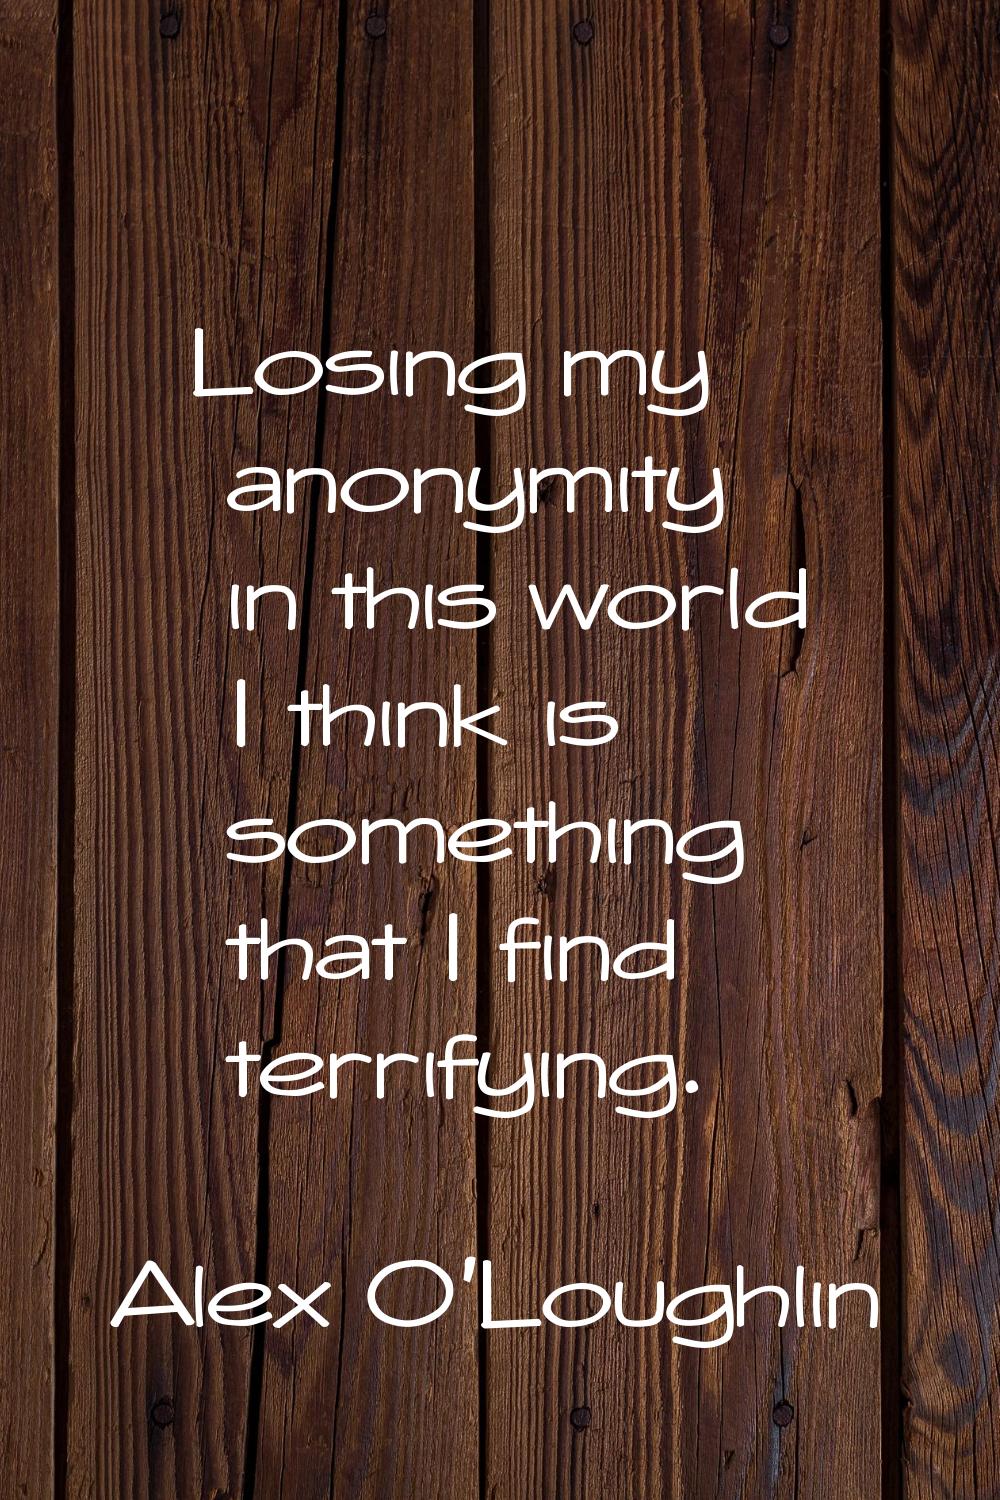 Losing my anonymity in this world I think is something that I find terrifying.